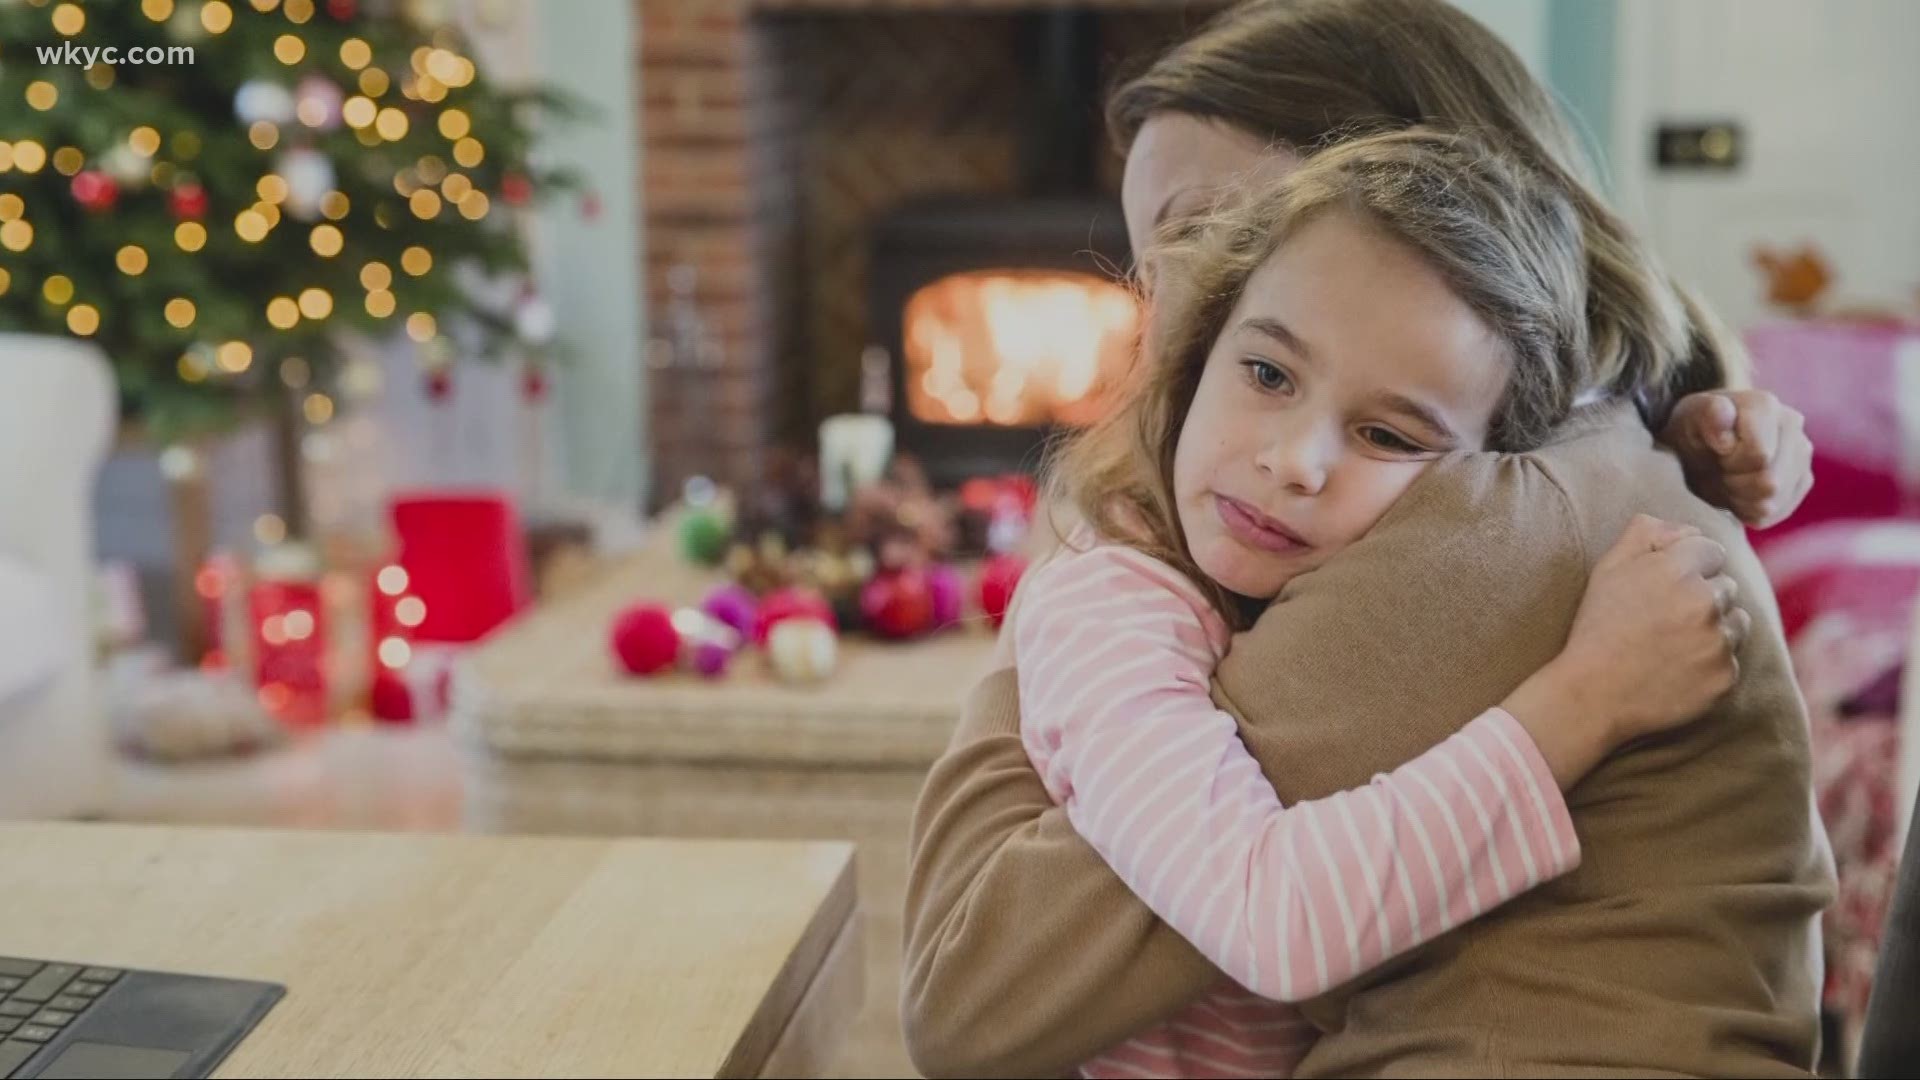 The holidays are different this year and it can be hard to focus on the positives, especially for children. We talked to a pediatric psychologist about it.